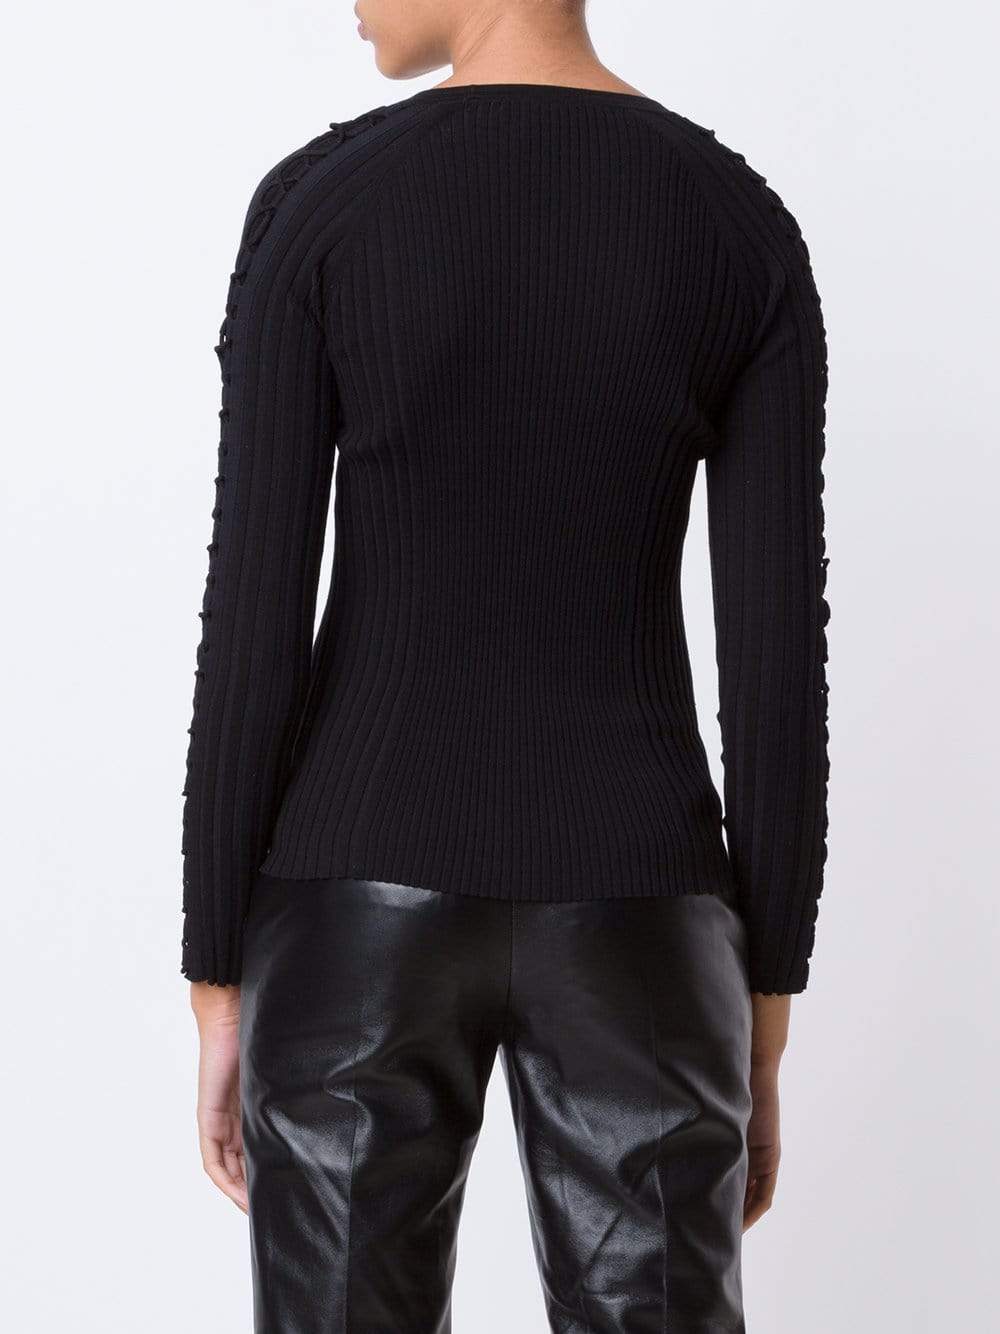 ALEXANDER WANG-Lace Up Pullover-